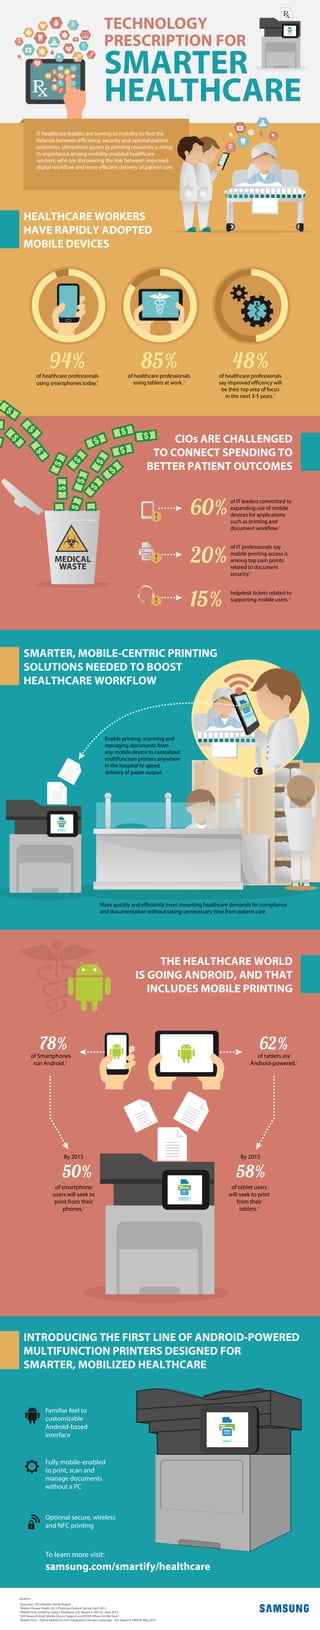 TECHNOLOGY
PRESCRIPTION FOR
SMARTER
HEALTHCARE
HEALTHCARE WORKERS
HAVE RAPIDLY ADOPTED
MOBILE DEVICES
IT healthcare leaders are turning to mobility to find the
balance between efficiency, security and optimal patient
outcomes. Ubiquitous access to printing resources is rising
in importance among mobility-enabled healthcare
workers, who are discovering the link between improved
digital workflow and more efficient delivery of patient care.
94%of healthcare professionals
using smartphones today.1
85%of healthcare professionals
using tablets at work.1
48%of healthcare professionals
say improved efficency will
be their top area of focus
in the next 3-5 years.2
CIOs ARE CHALLENGED
TO CONNECT SPENDING TO
BETTER PATIENT OUTCOMES
MEDICAL
WASTE
60%
of IT leaders committed to
expanding use of mobile
devices for applications
such as printing and
document workflow.3
20%
of IT professionals say
mobile printing access is
among top pain points
related to document
security.3
15%
helpdesk tickets related to
supporting mobile users.4
SMARTER, MOBILE-CENTRIC PRINTING
SOLUTIONS NEEDED TO BOOST
HEALTHCARE WORKFLOW
Enable printing, scanning and
managing documents from
any mobile device to centralized
multifunction printers anywhere
in the hospital to speed
delivery of paper output.
More quickly and efficiently meet mounting healthcare demands for compliance
and documentation without taking unnecessary time from patient care.
THE HEALTHCARE WORLD
IS GOING ANDROID, AND THAT
INCLUDES MOBILE PRINTING
of Smartphones
run Android.5
78% of tablets are
Android-powered.5
62%
of tablet users
will seek to print
from their
tablets.4
58%
PRINT
of smartphone
users will seek to
print from their
phones.5
50%
By 2015 By 2015
INTRODUCING THE FIRST LINE OF ANDROID-POWERED
MULTIFUNCTION PRINTERS DESIGNED FOR
SMARTER, MOBILIZED HEALTHCARE
SOURCES:
1
Epocrates, 2013 Mobile Trends Report
2
Wolters Kluwer Health 2013 Physician Outlook Survey, April 2013
3
Mobile Print: Enabling Today’s Workforce. IDC Report # 249153. June 2014
4
HDI Research Brief, Mobile Device Support and BYOD: Where Are We Now?
5
Mobile Print – Native Mobile OS Print Integration Changes Landscape. IDC Report # 248524. May 2014
PRINTPRINT
Familiar feel to
customizable
Android-based
interface
Fully mobile-enabled
to print, scan and
manage documents
without a PC
Optional secure, wireless
and NFC printing
PRINT
To learn more visit:
samsung.com/smartify/healthcare
PRINT
 